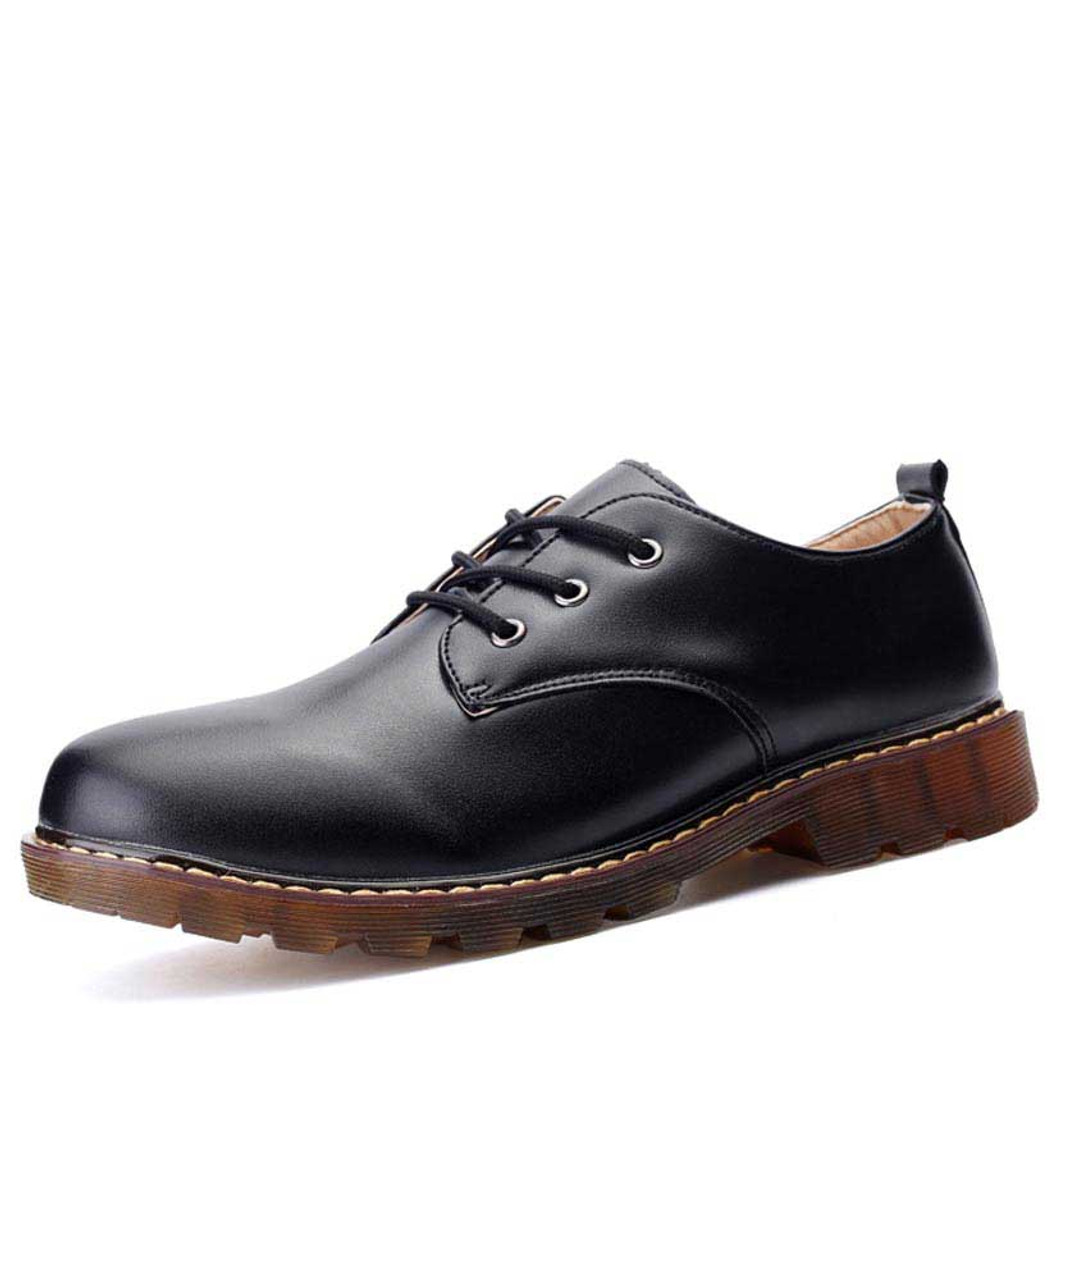 M US Summerwhisper Mens Trendy Round Toe Lace-up Low Top Oxfords Leather Dress Shoes Black 8.5 D 